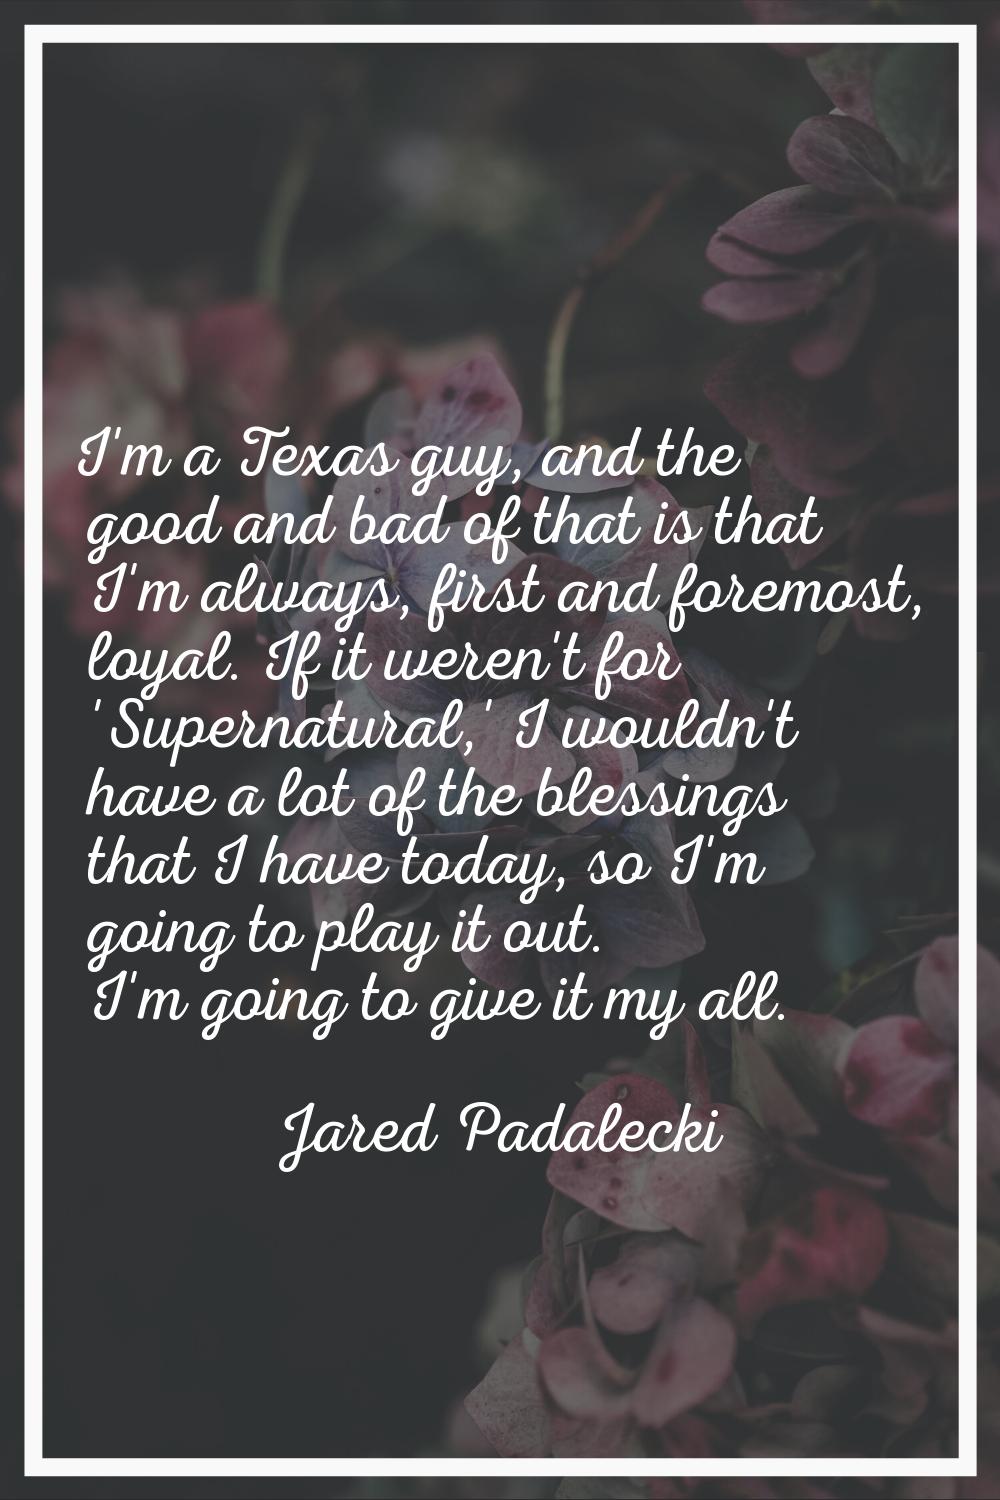 I'm a Texas guy, and the good and bad of that is that I'm always, first and foremost, loyal. If it 